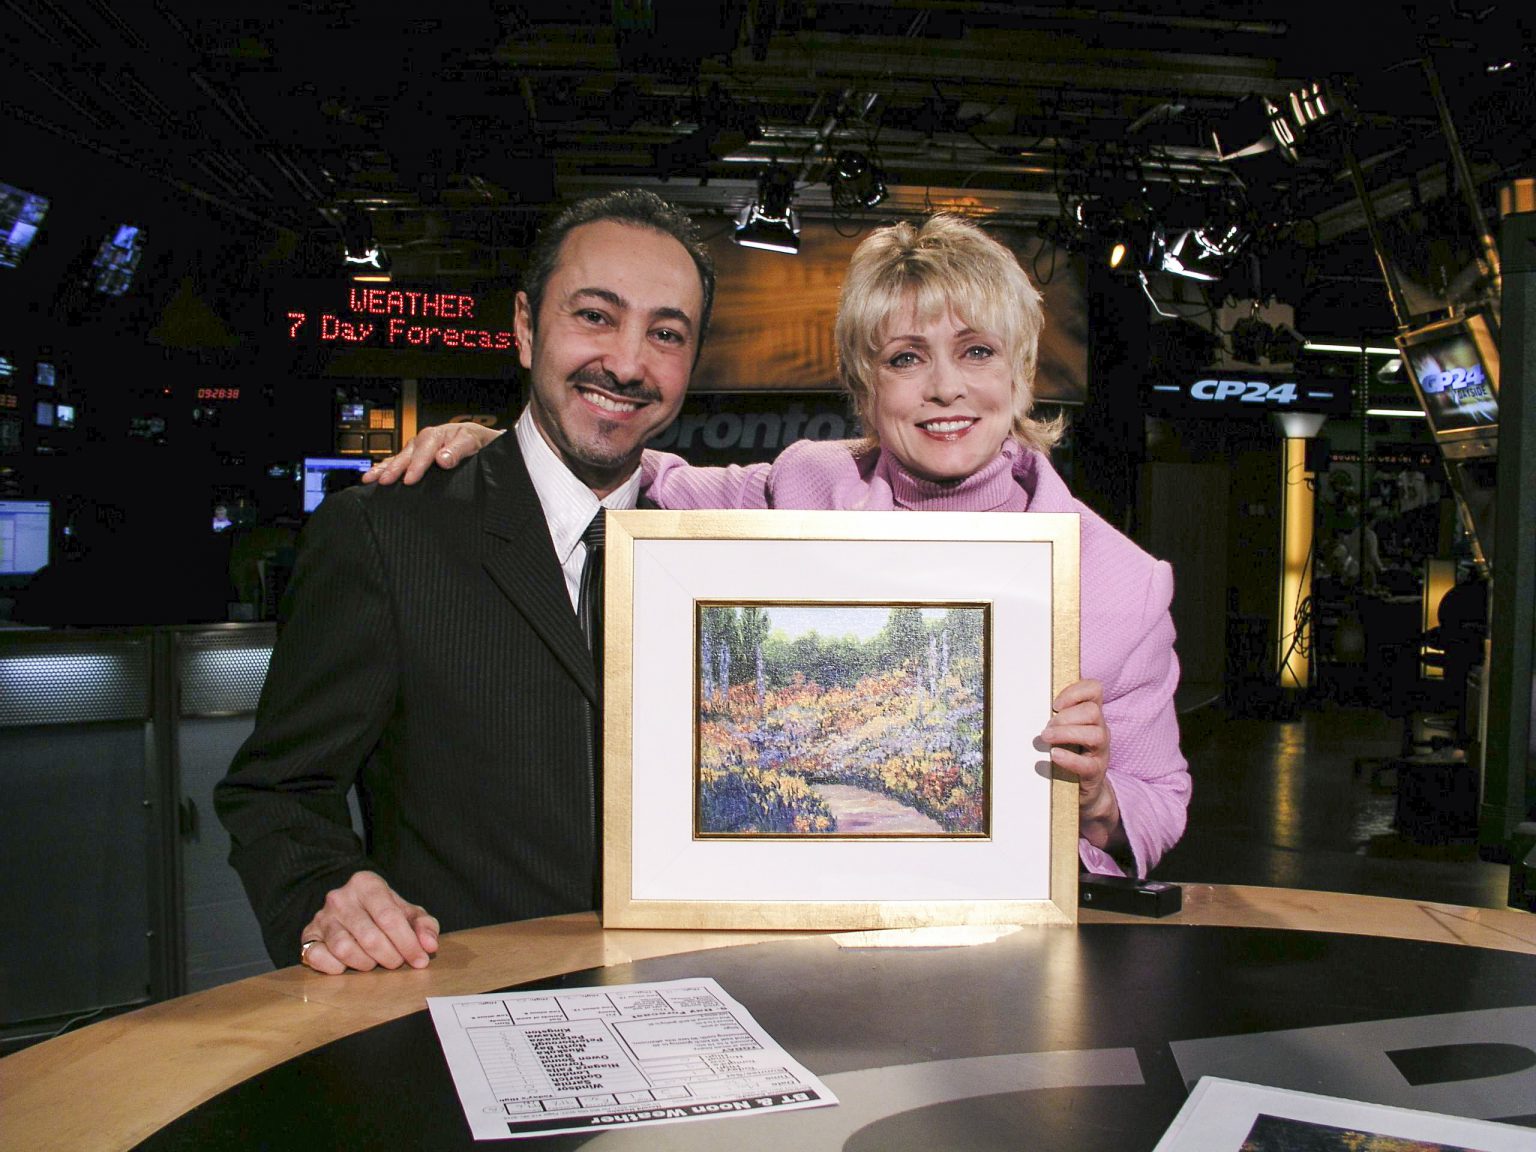 Media coverage with Host Anne Rohmer of Antoine Gaber for the ”Passion for Life” Art Exhibition and fundraising Program across Canada, on Breaskfast TV, CP24 Toronto.